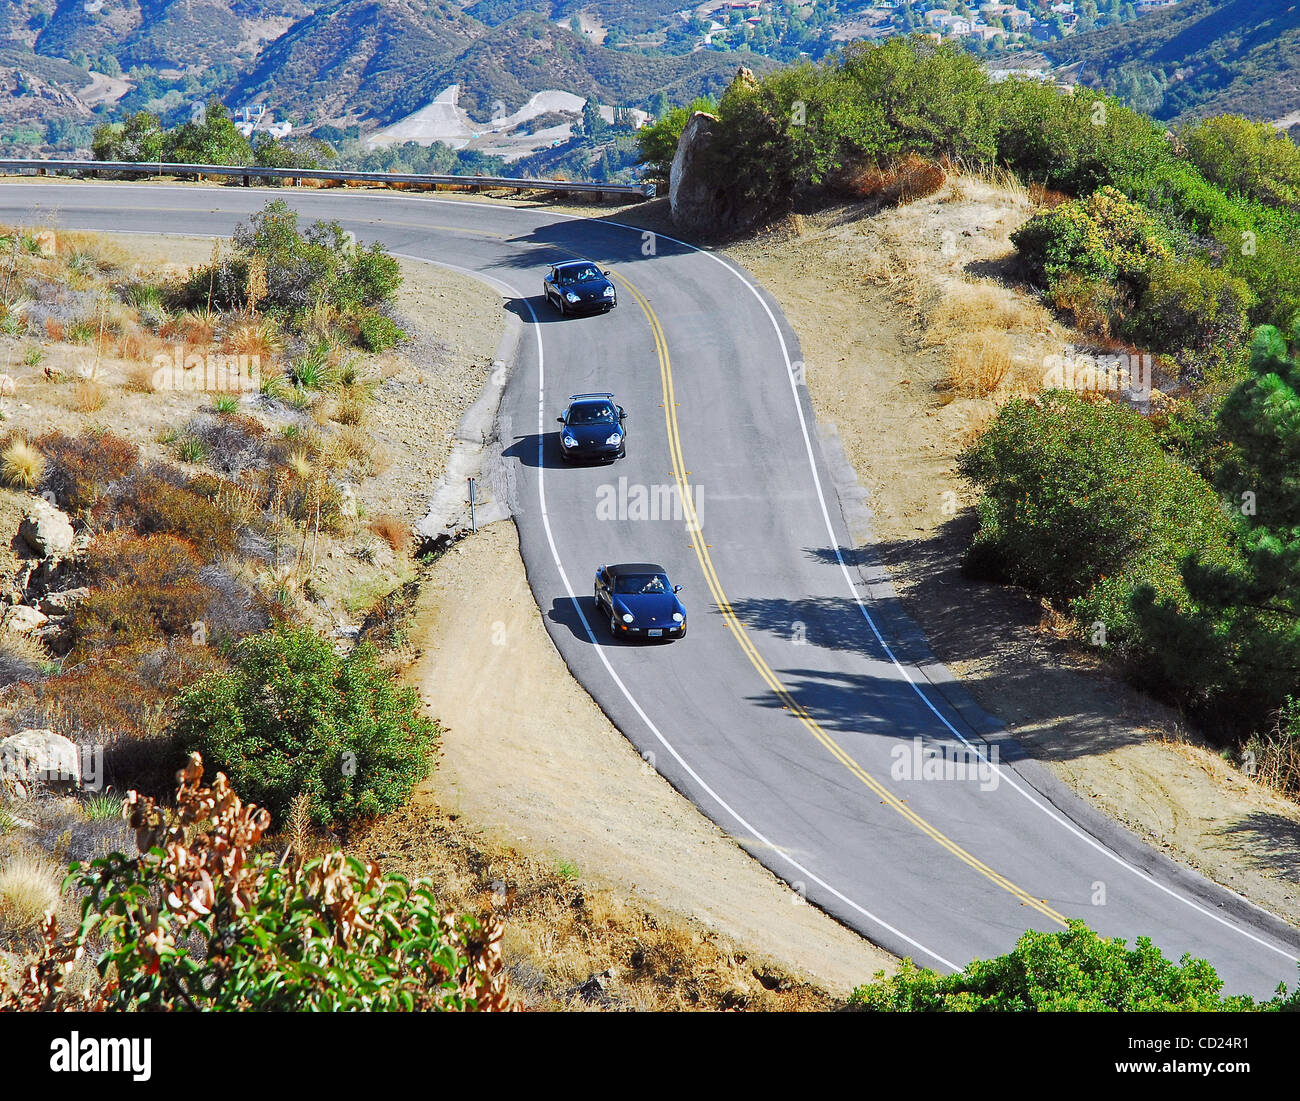 Three Porsche 911's Racing Down A Hairpin Curve In The Mountains Stock Photo